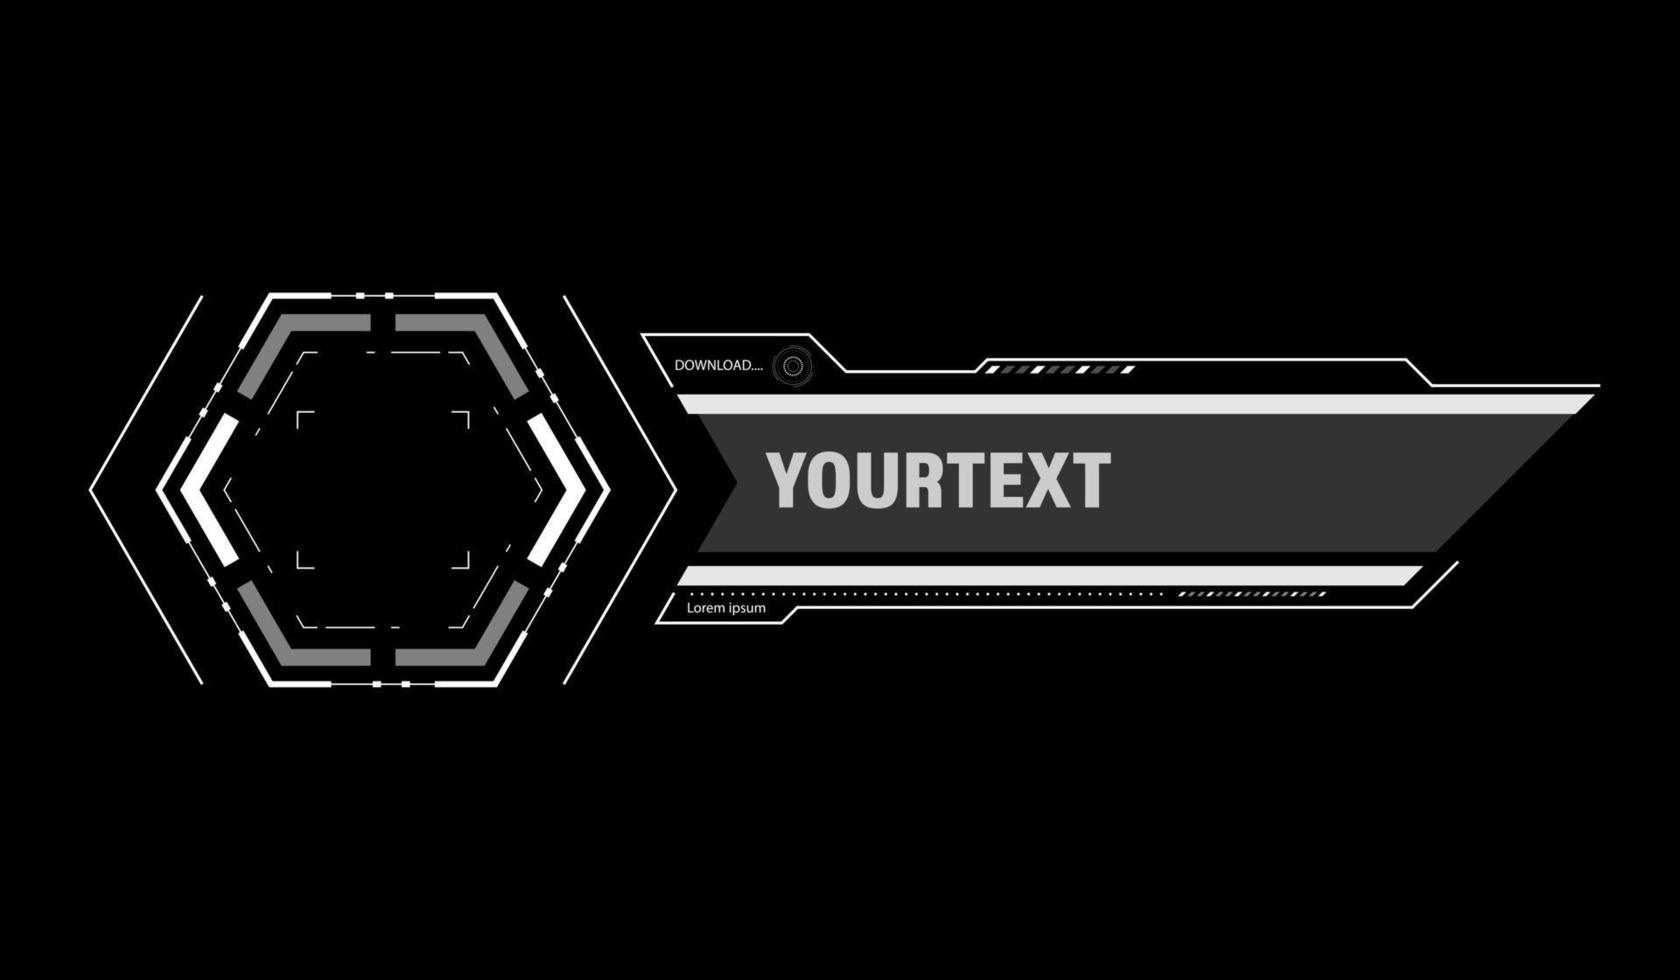 Futuristic lower third. Sci-fi design template for channel, news, information call box bars and modern digital info boxes. vector